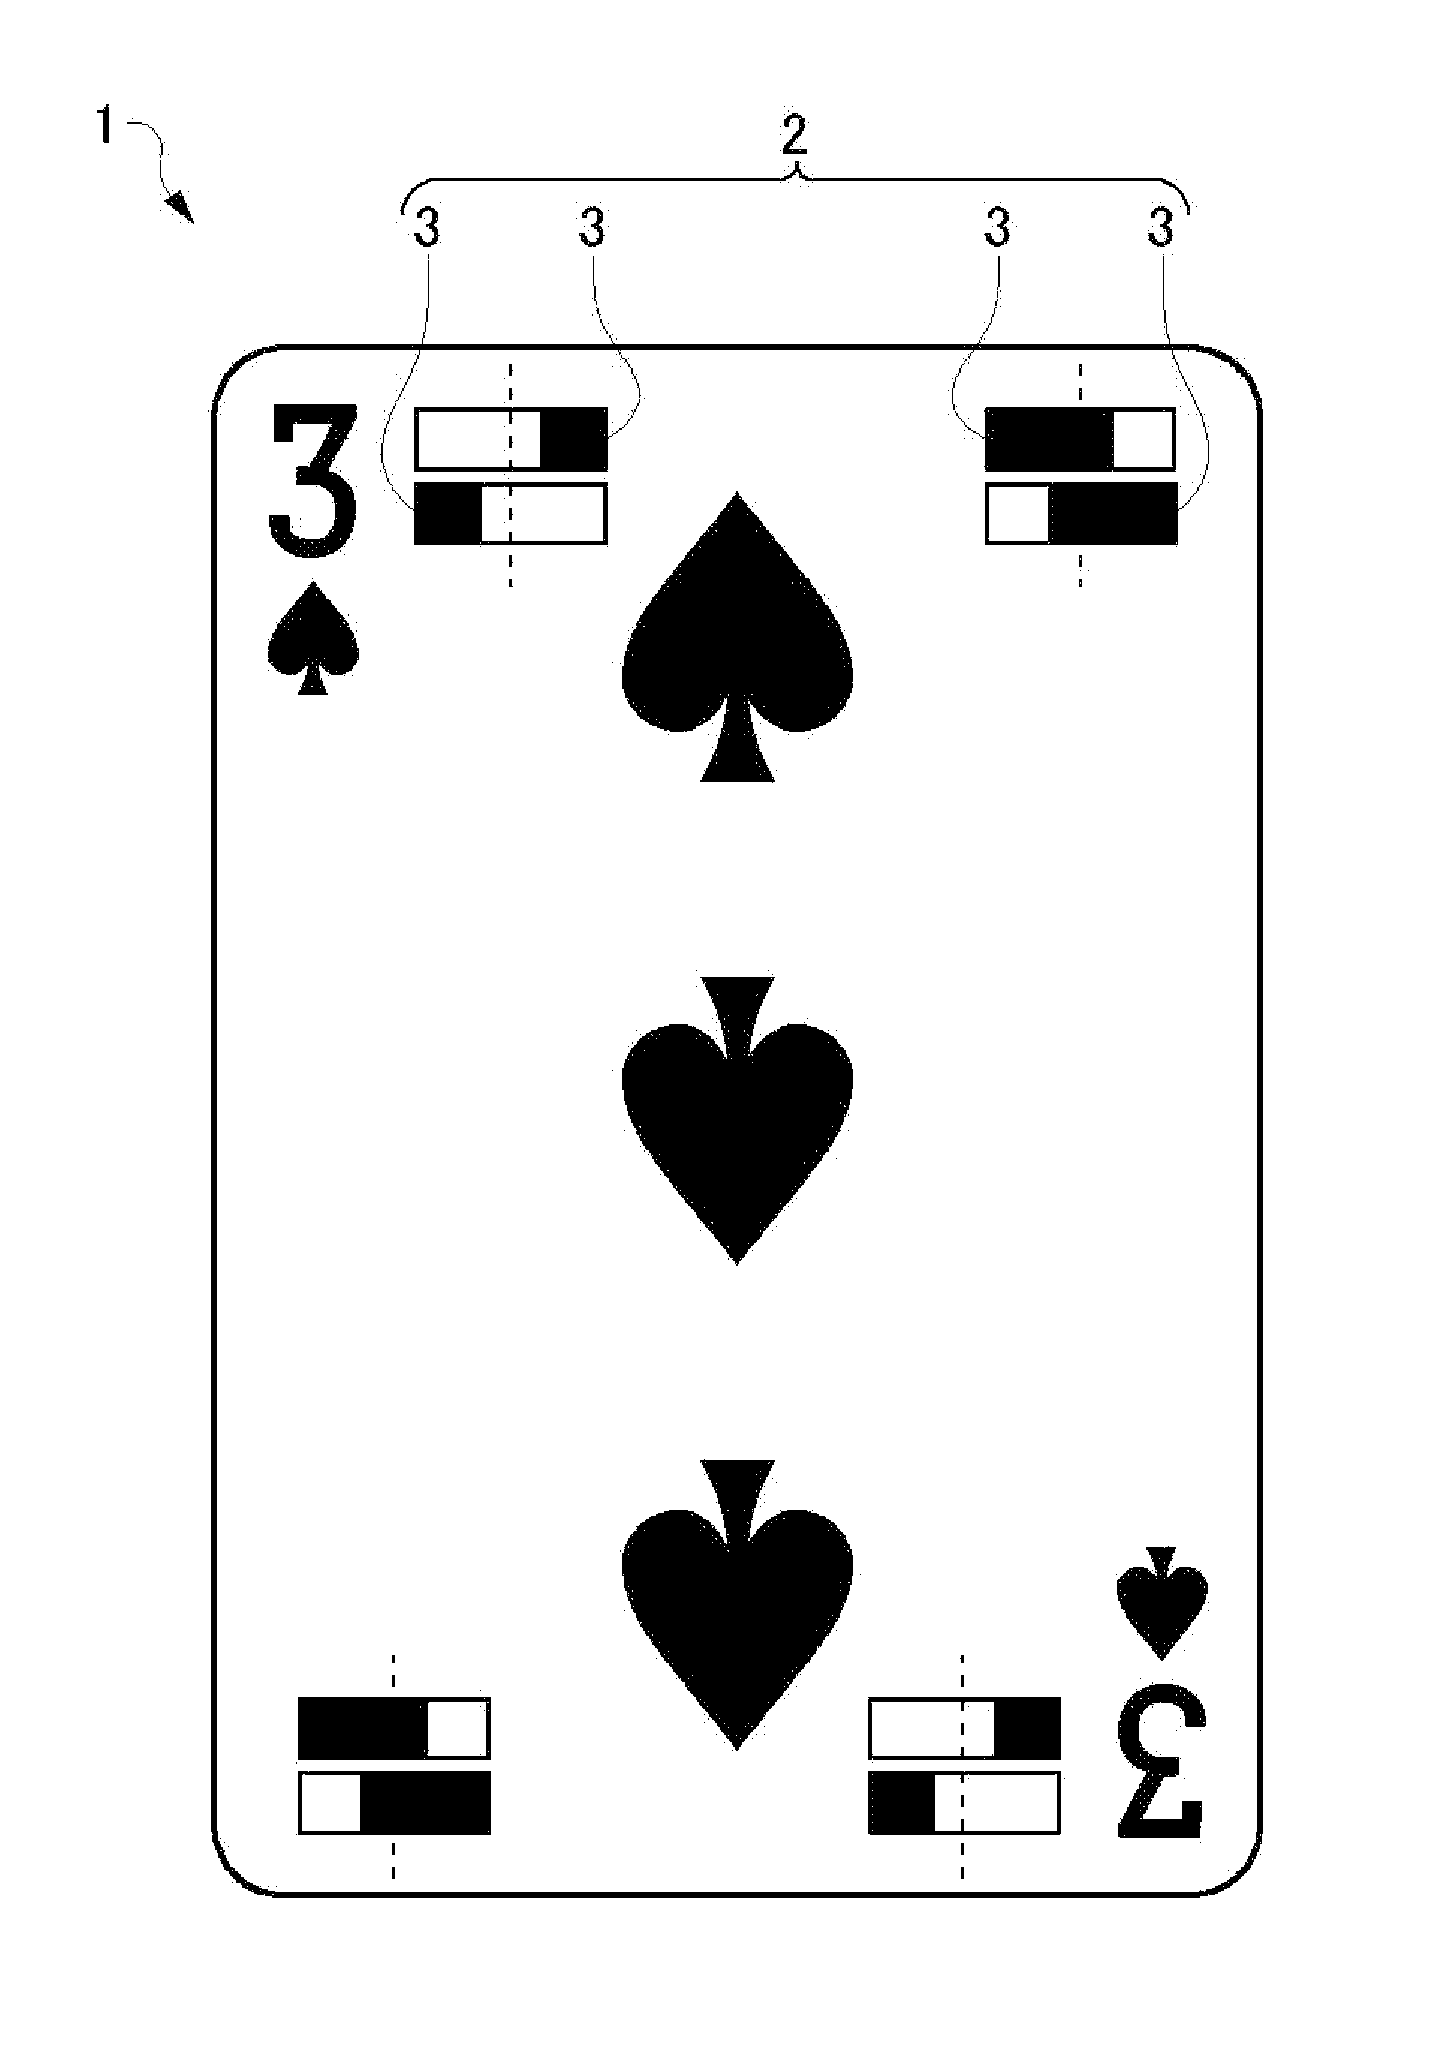 Playing cards and table game system